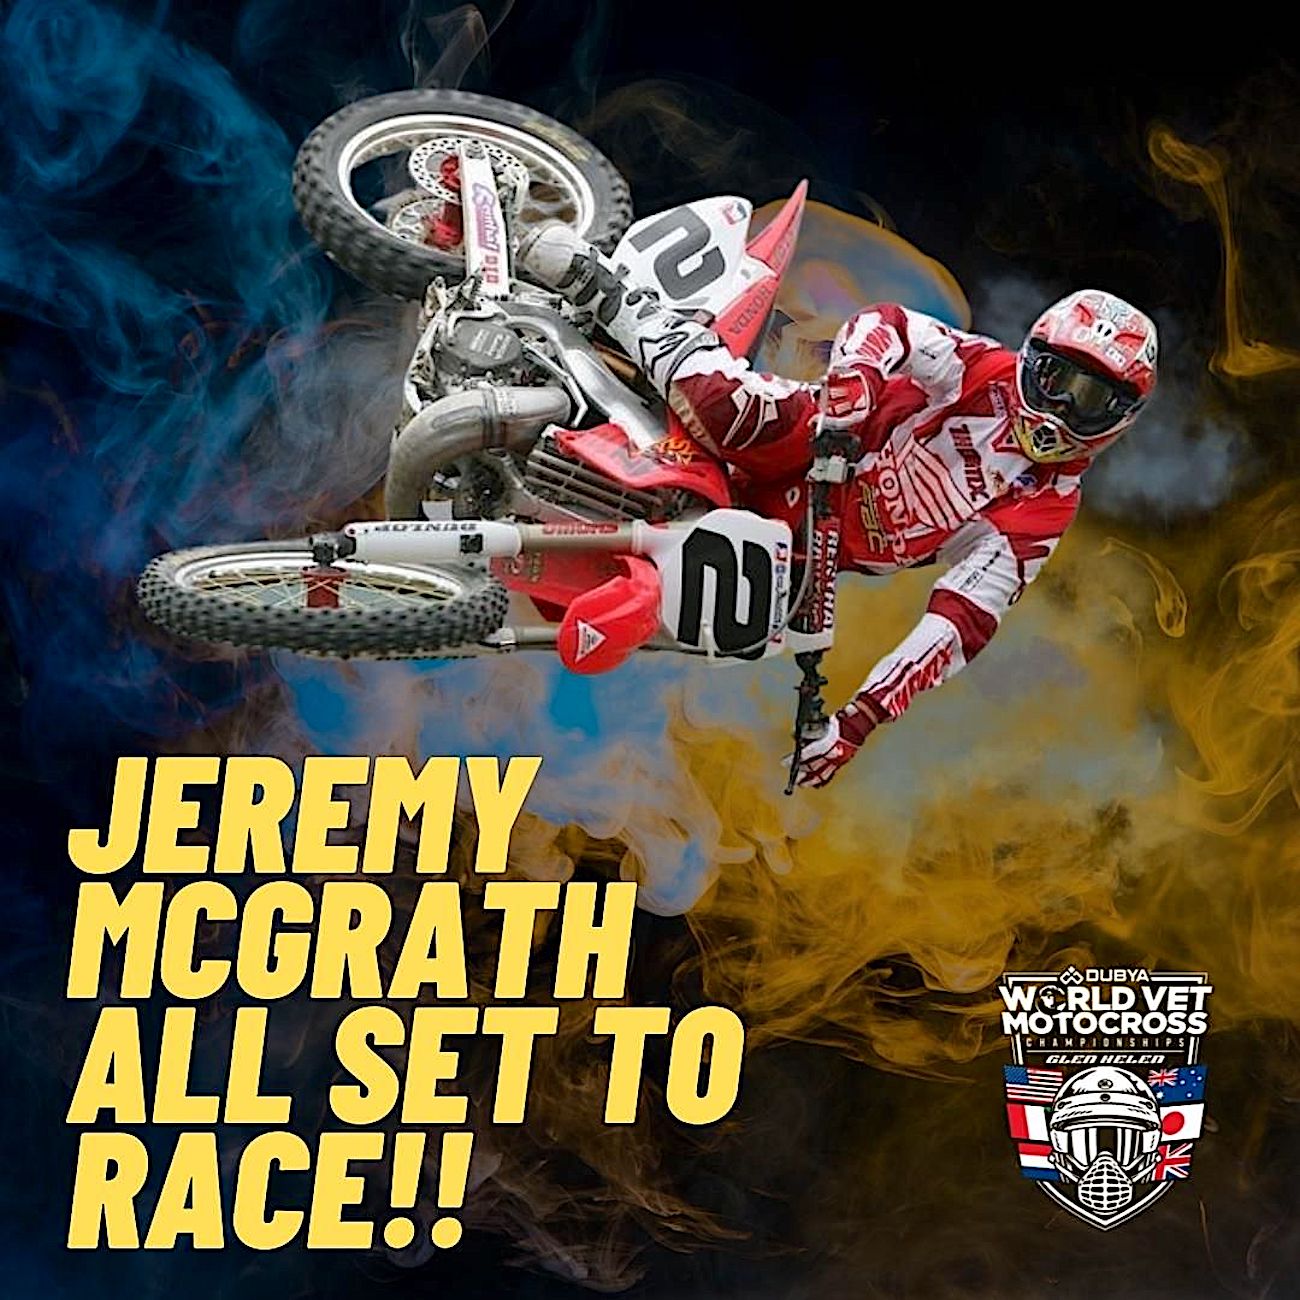 Fans will get to see Jeremy race on both days of this weekend.